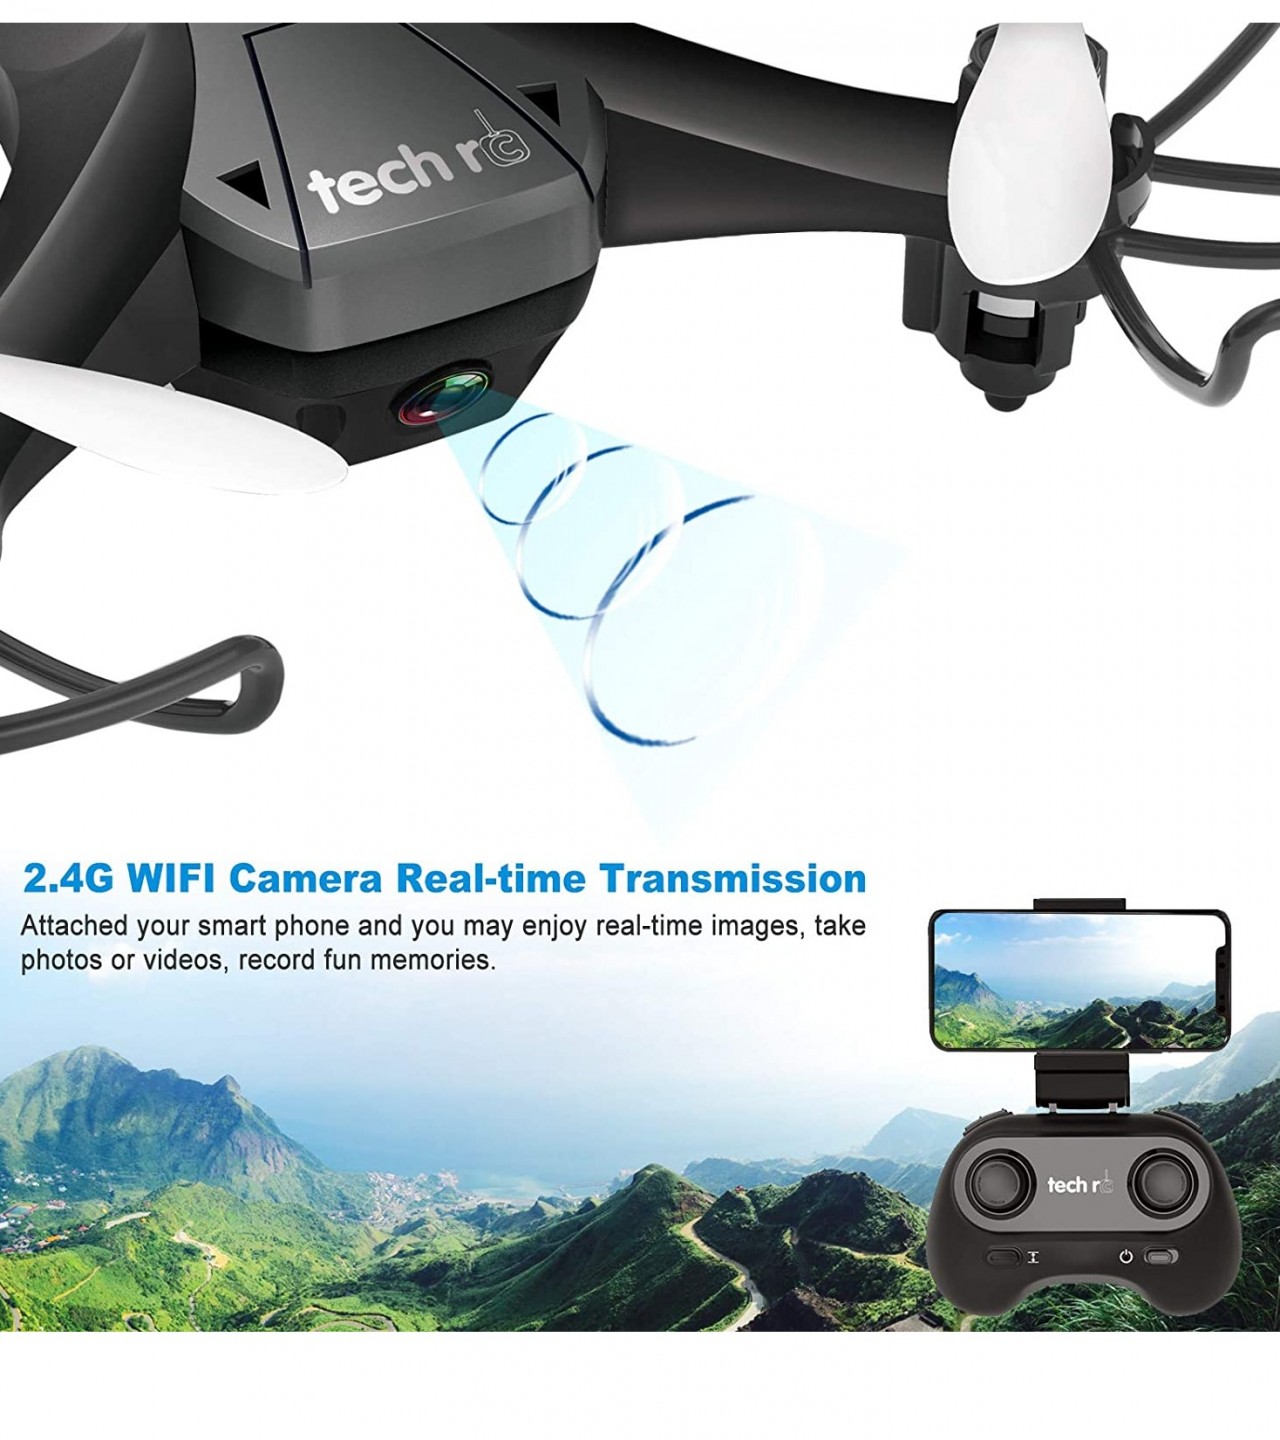 Tech RC Mini Drone with Camera Easy Control with Headless Hold Long Flight Time with 2 Batteries